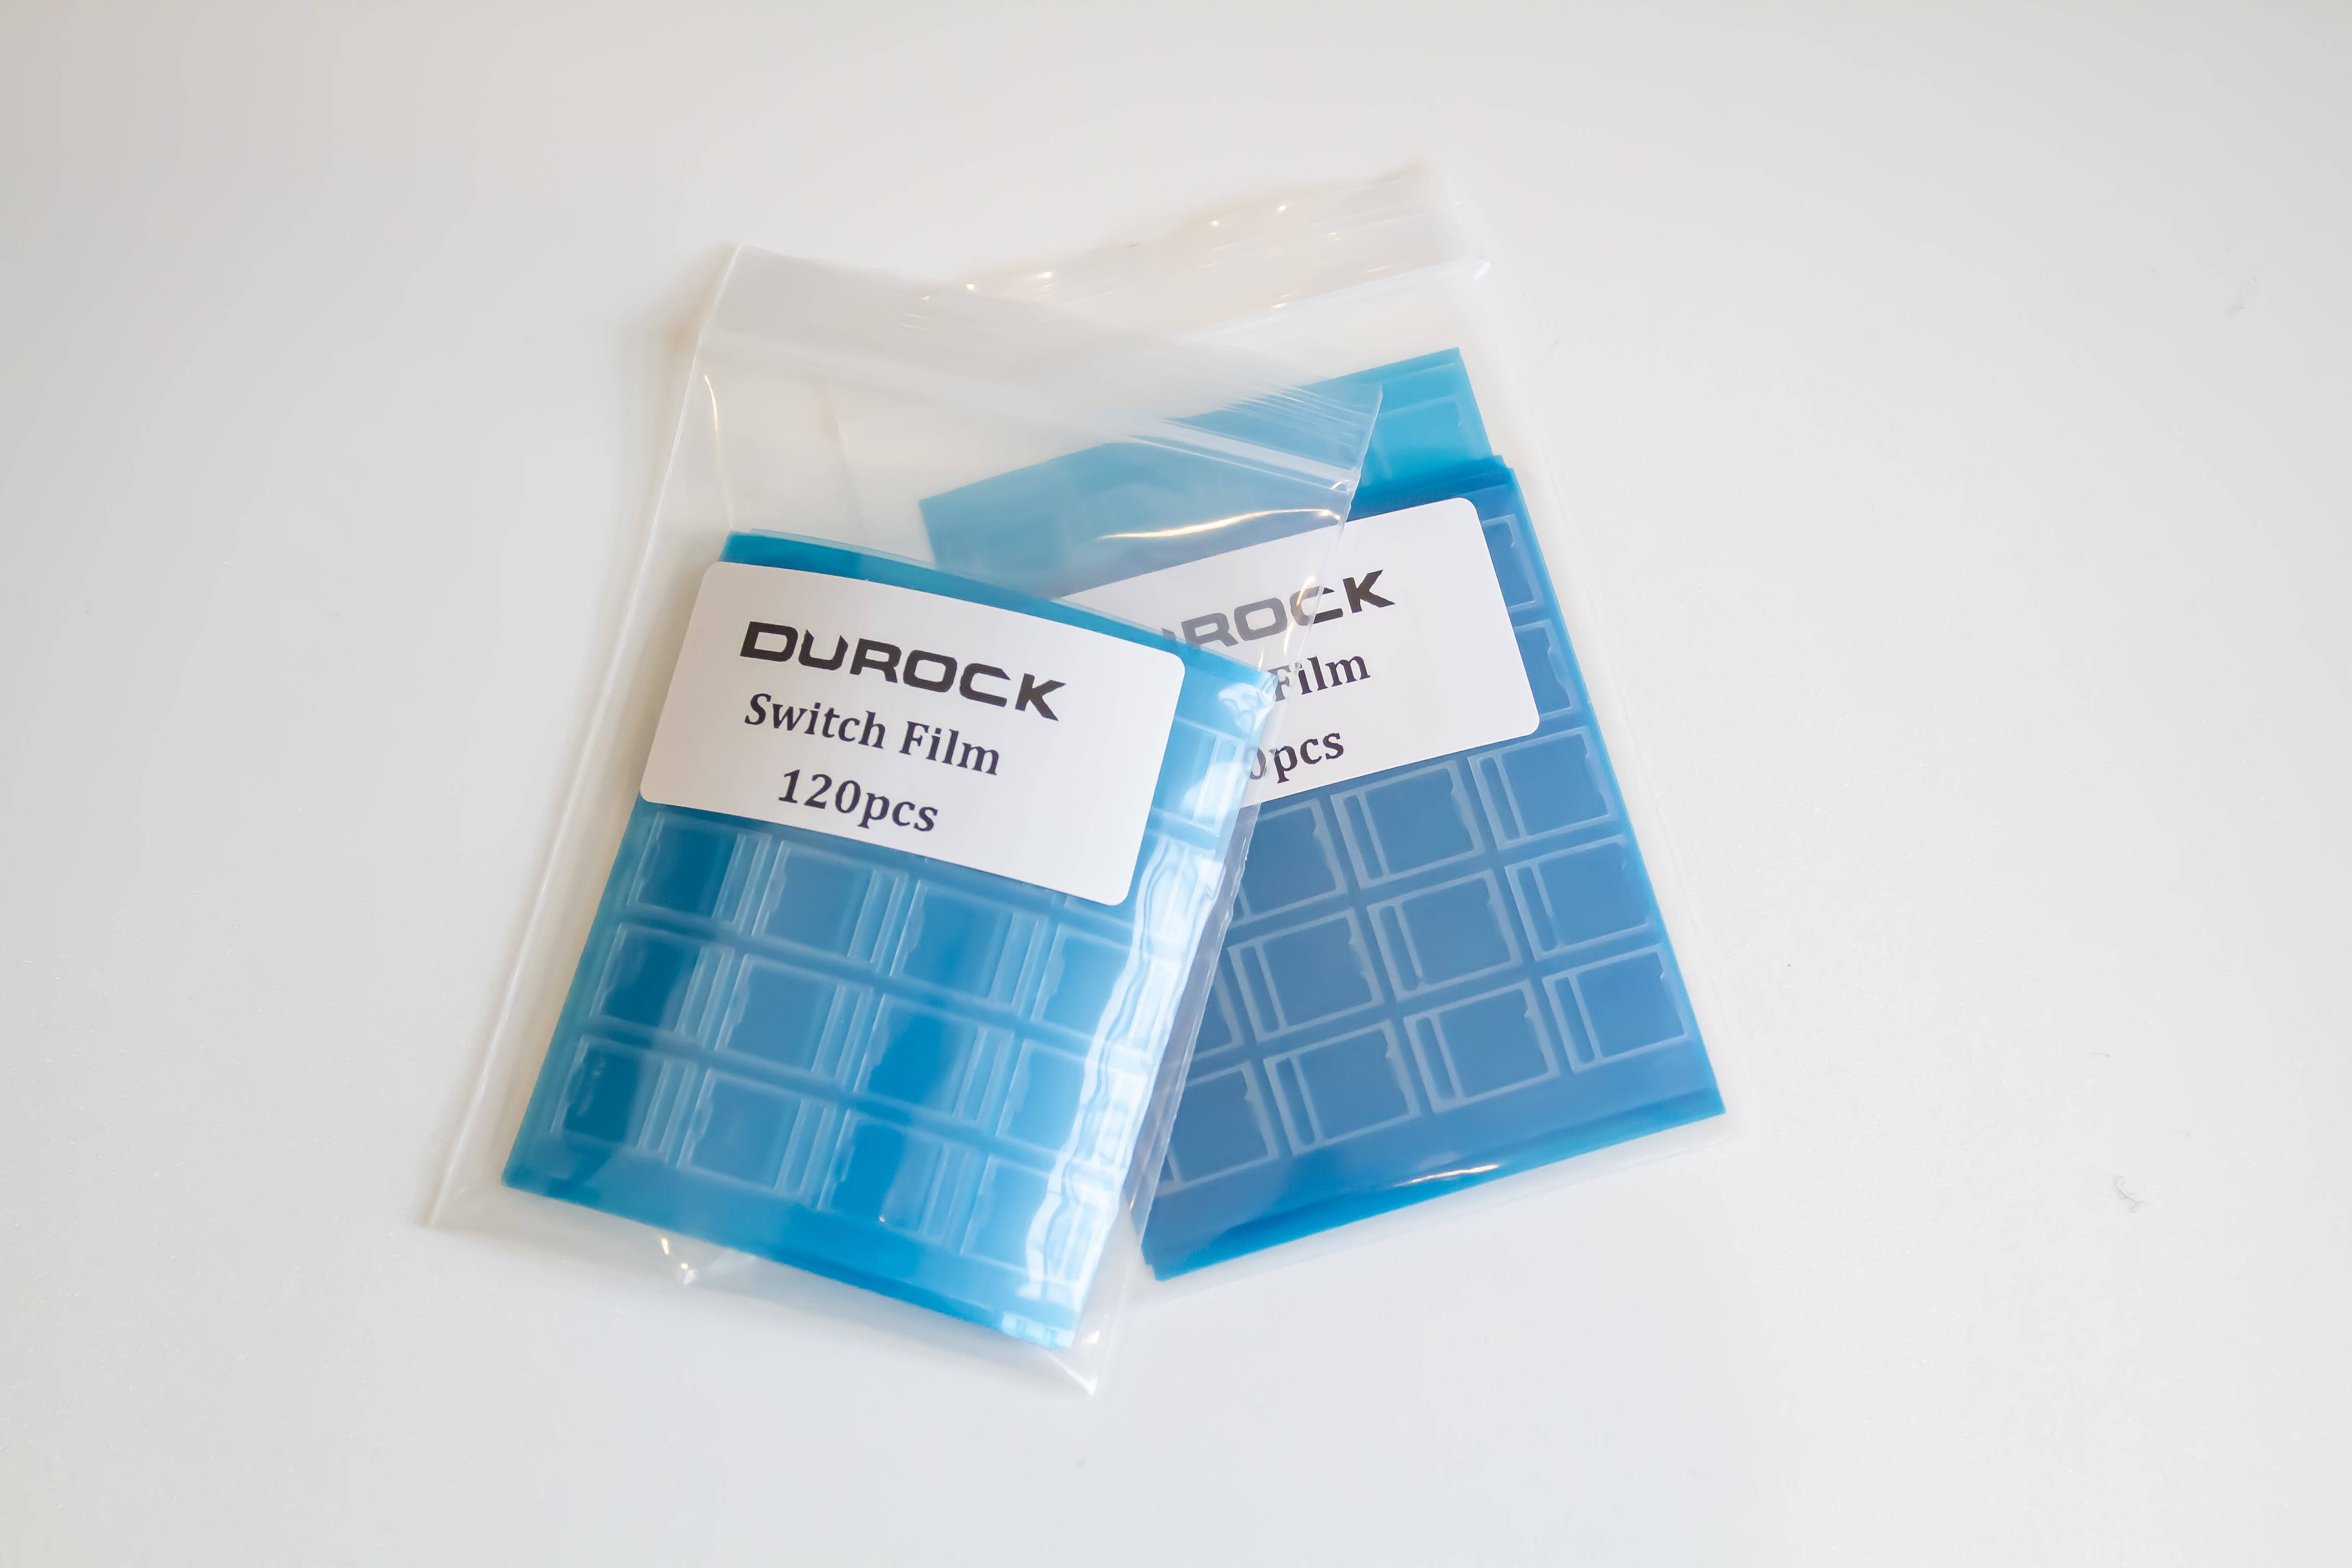 Two packs of Durock mechanical key switch films.